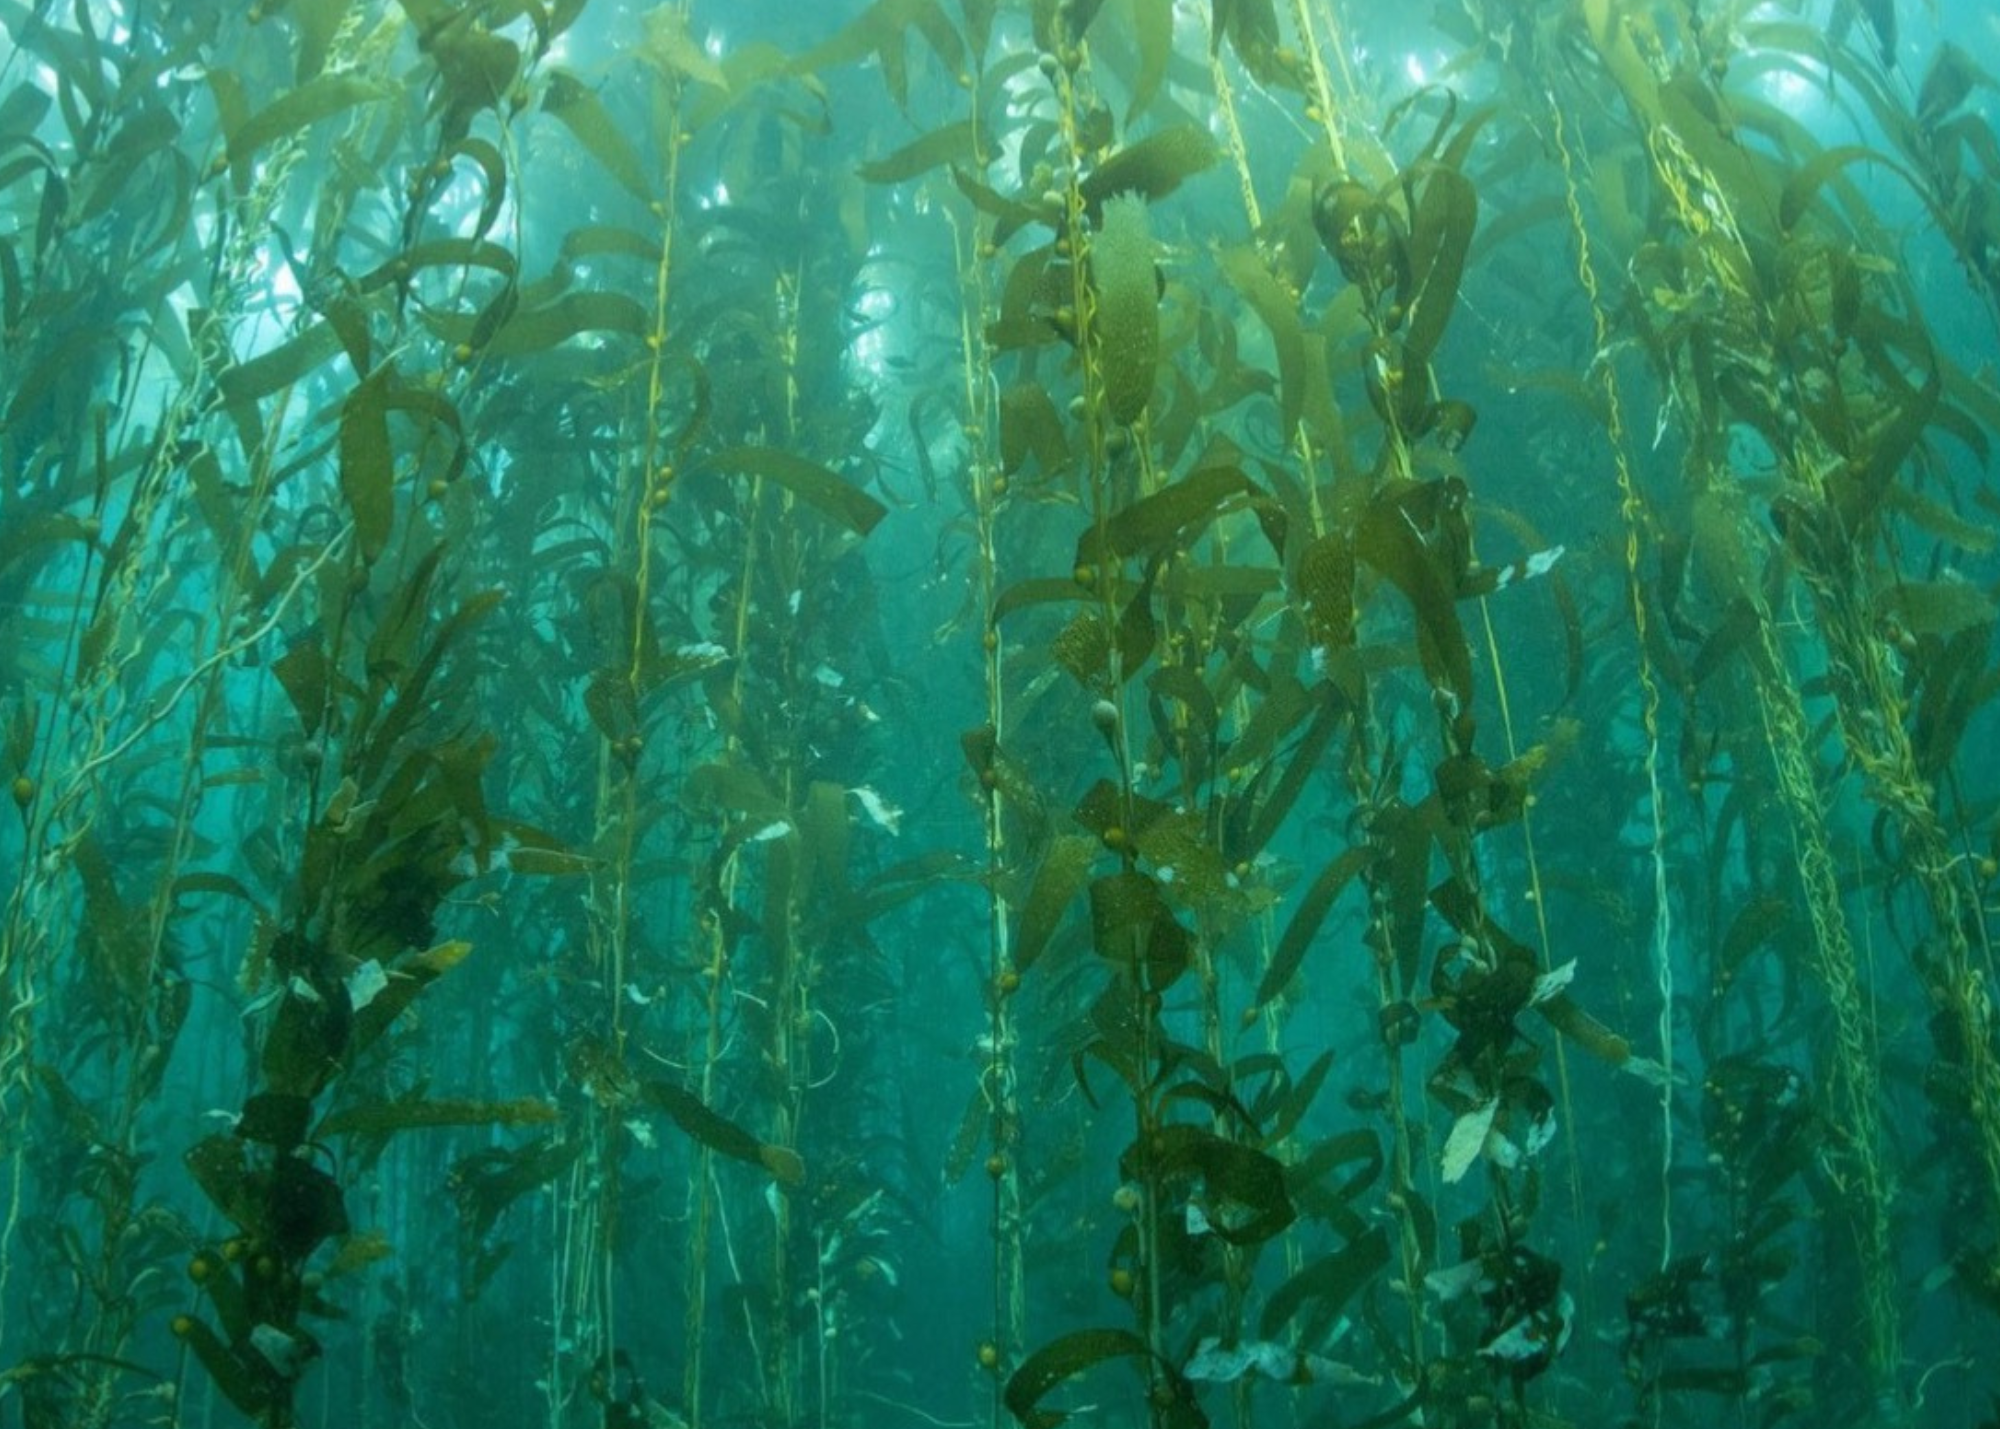 Kelp forest in Channel Islands National Park